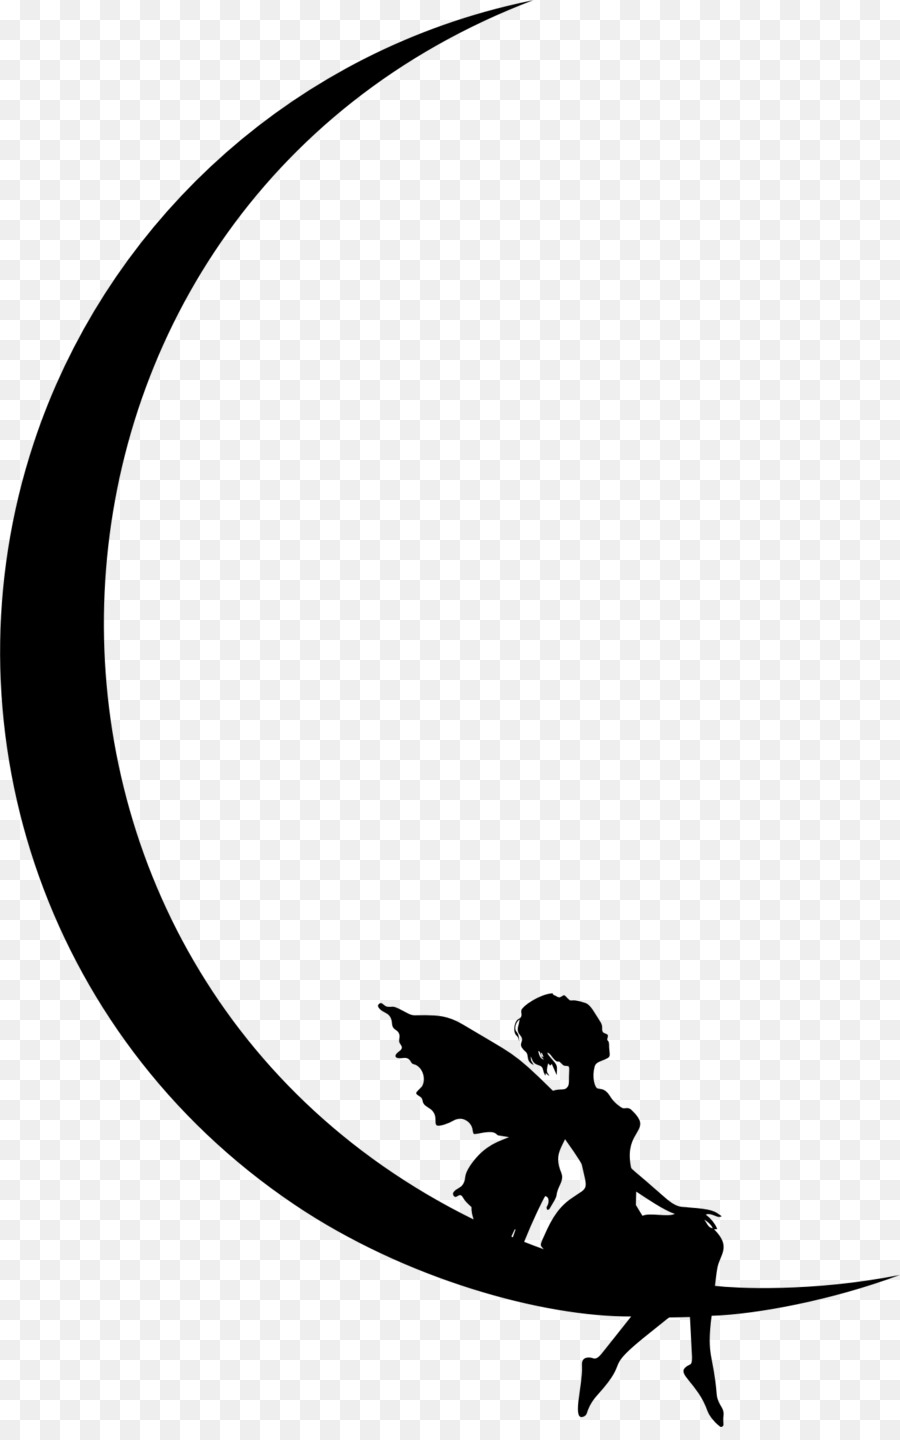 Moon Lunar phase Drawing Clip art - moon png download - 1356*2150 - Free Transparent Moon png Download.